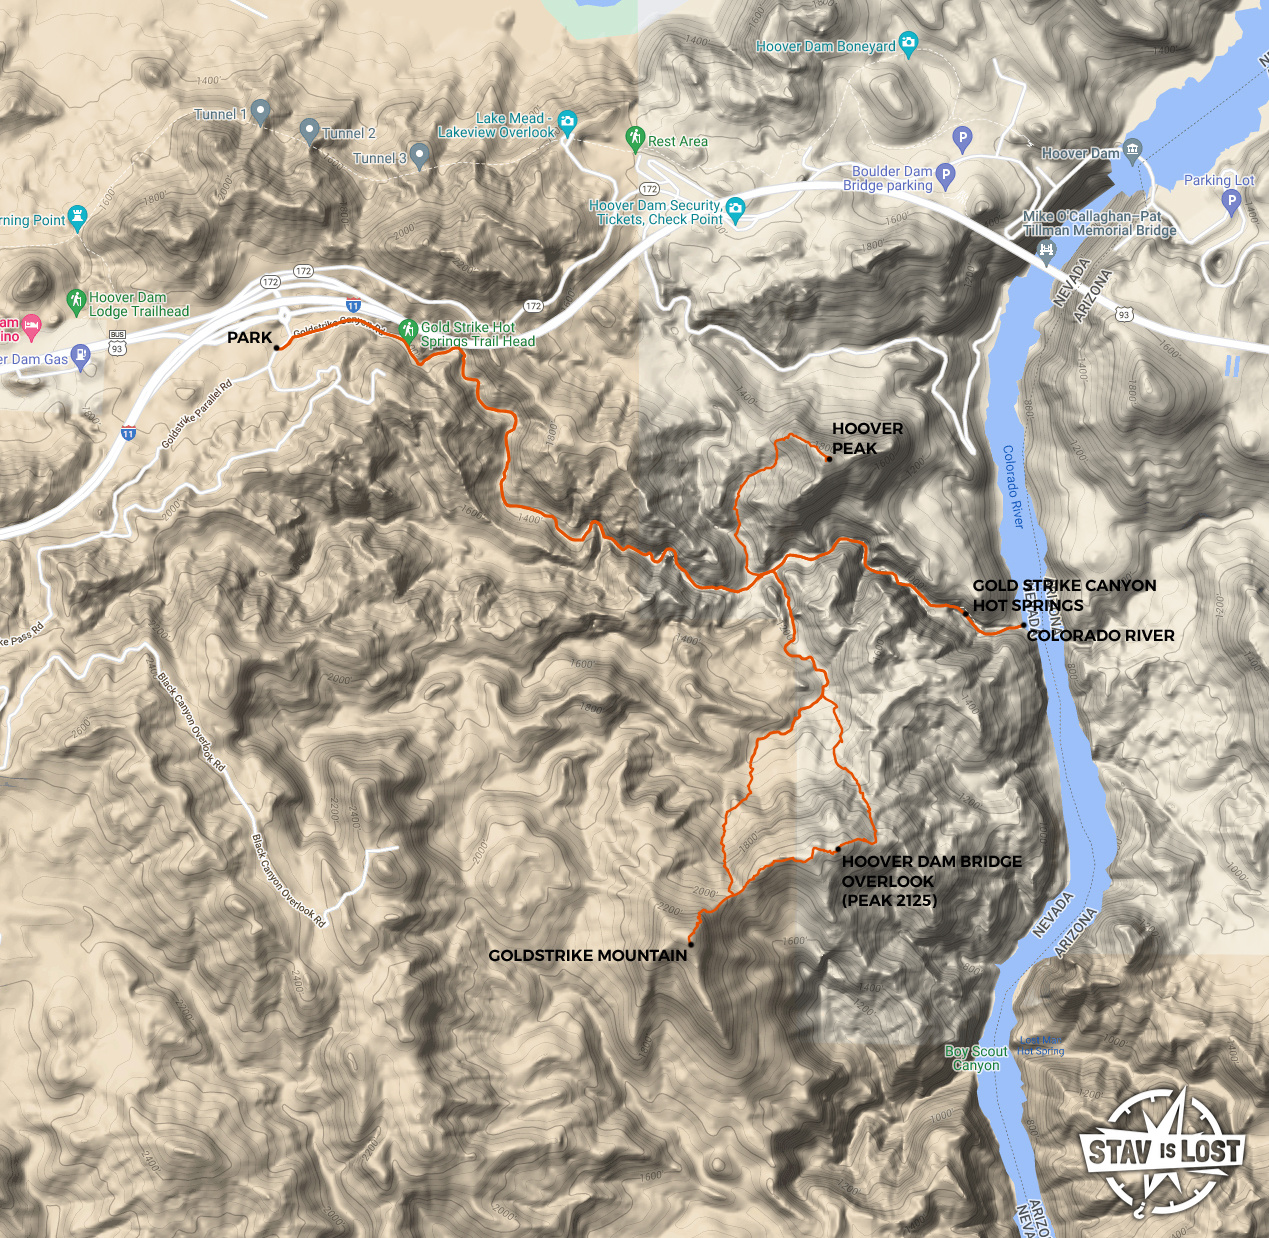 map for Goldstrike Mountain and Hoover Peak by stav is lost